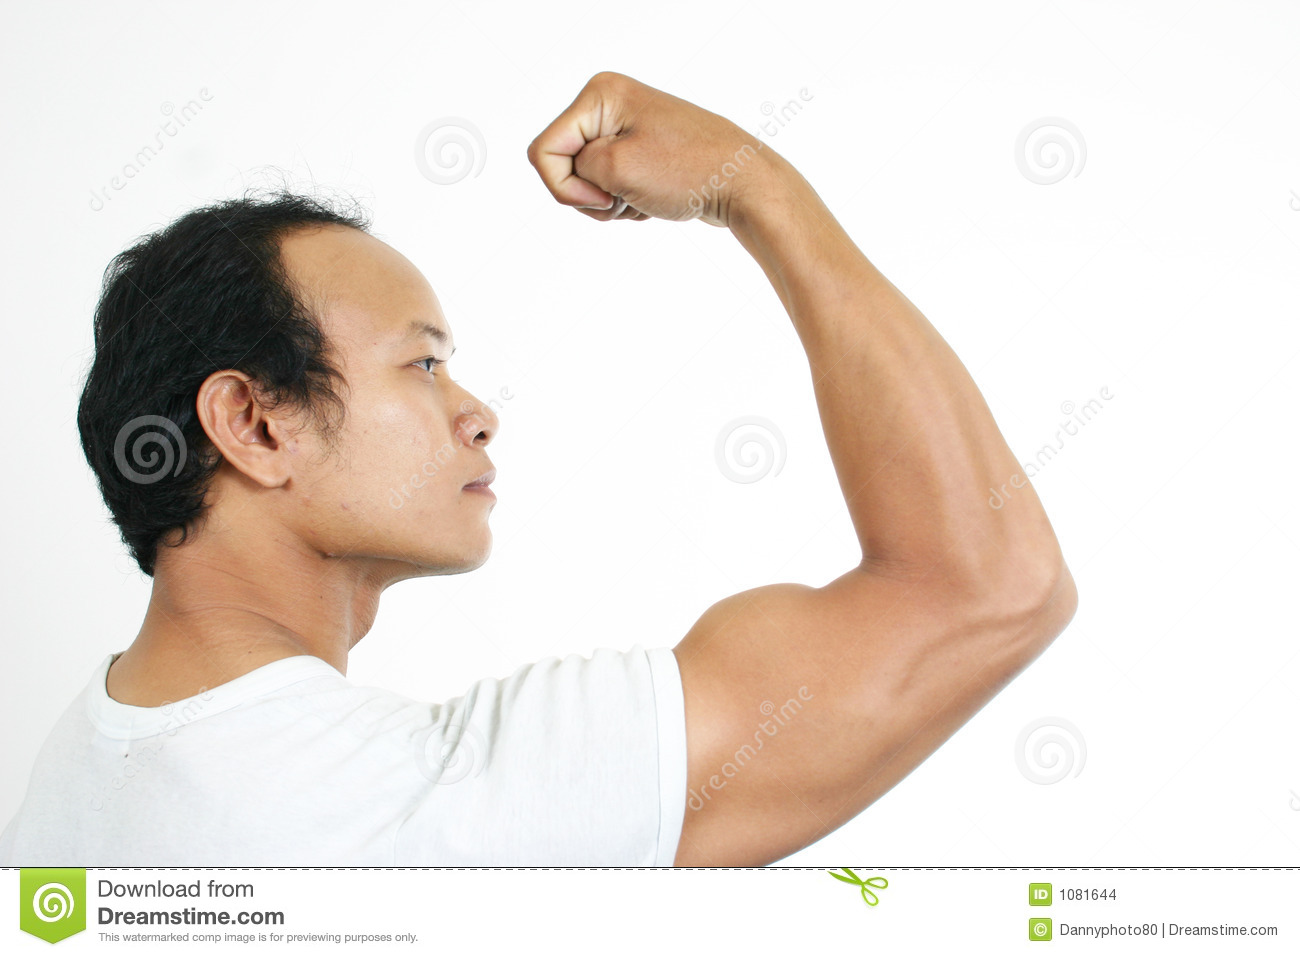 Muscle Guy 1 Stock Images   Image  1081644